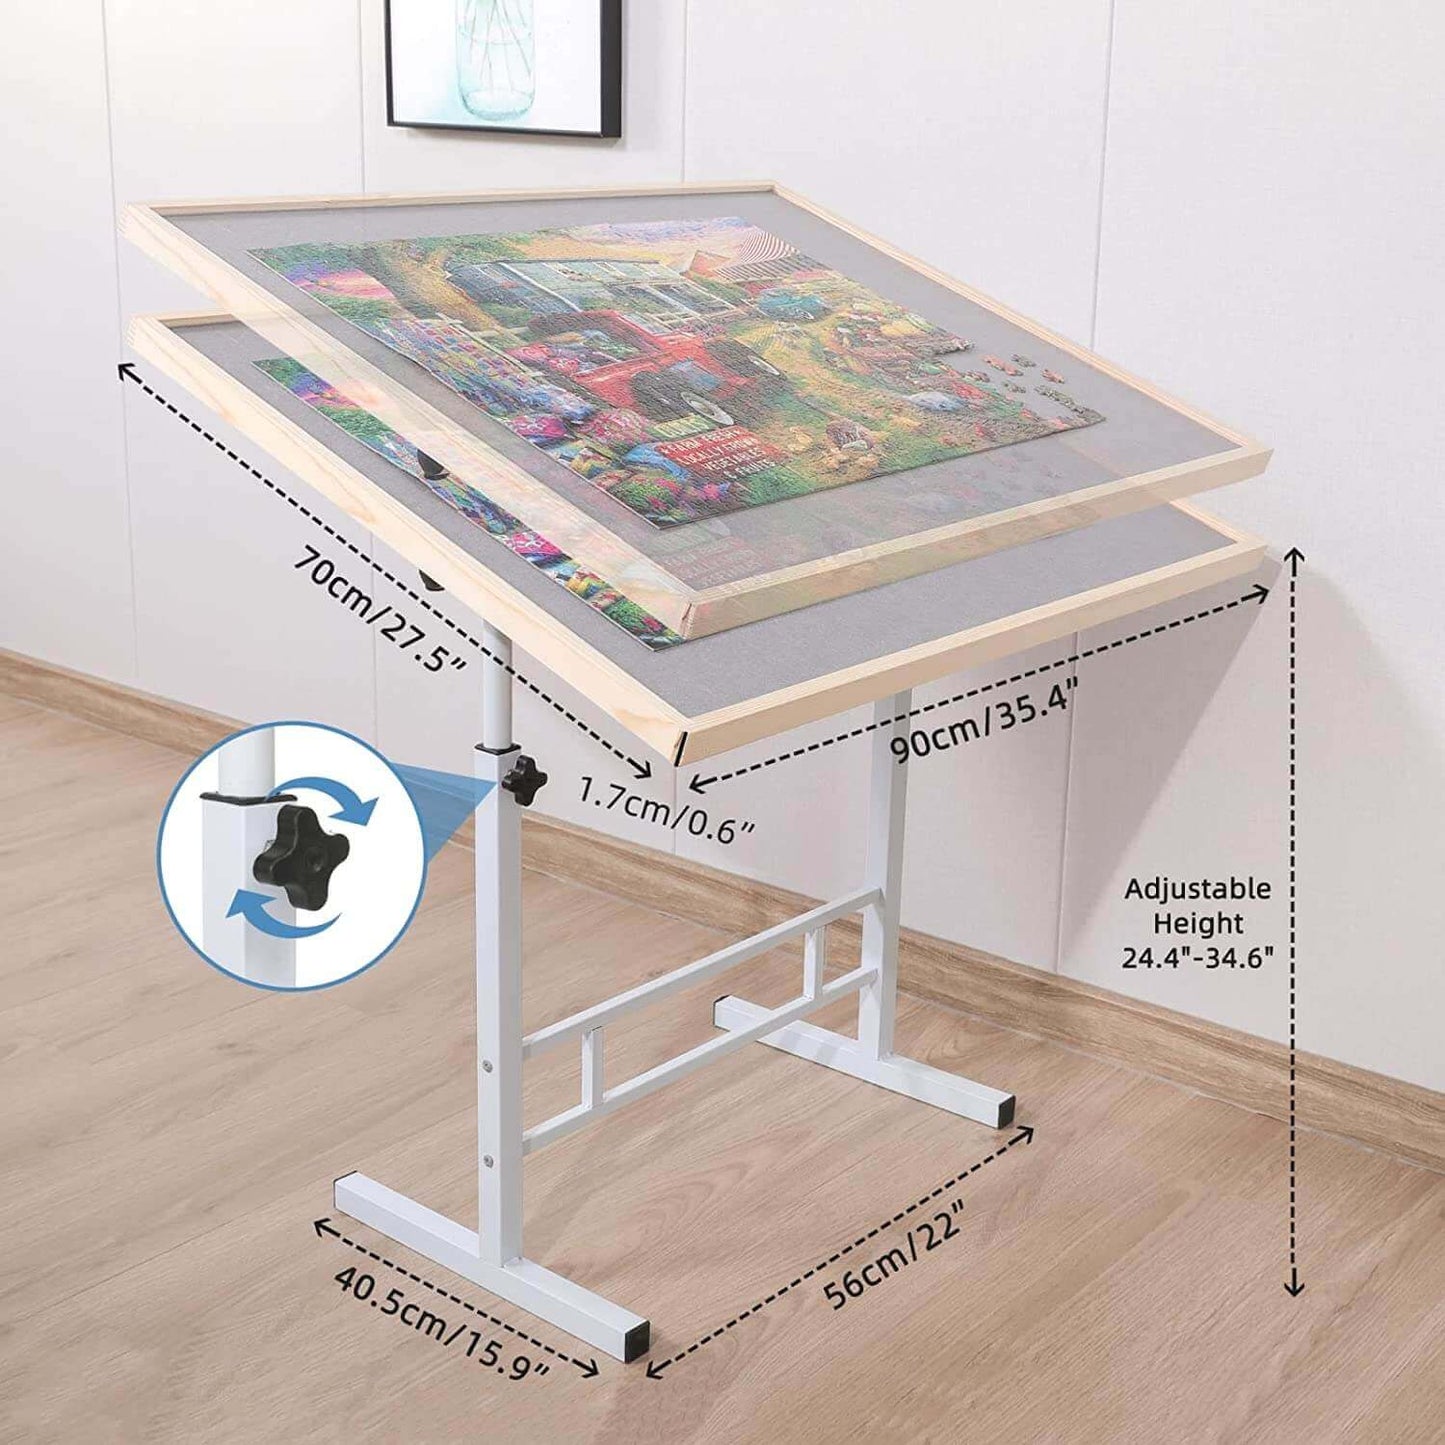 Fanwer jigsaw puzzle table with adjustable iron legs and puzzle board, the adjust button